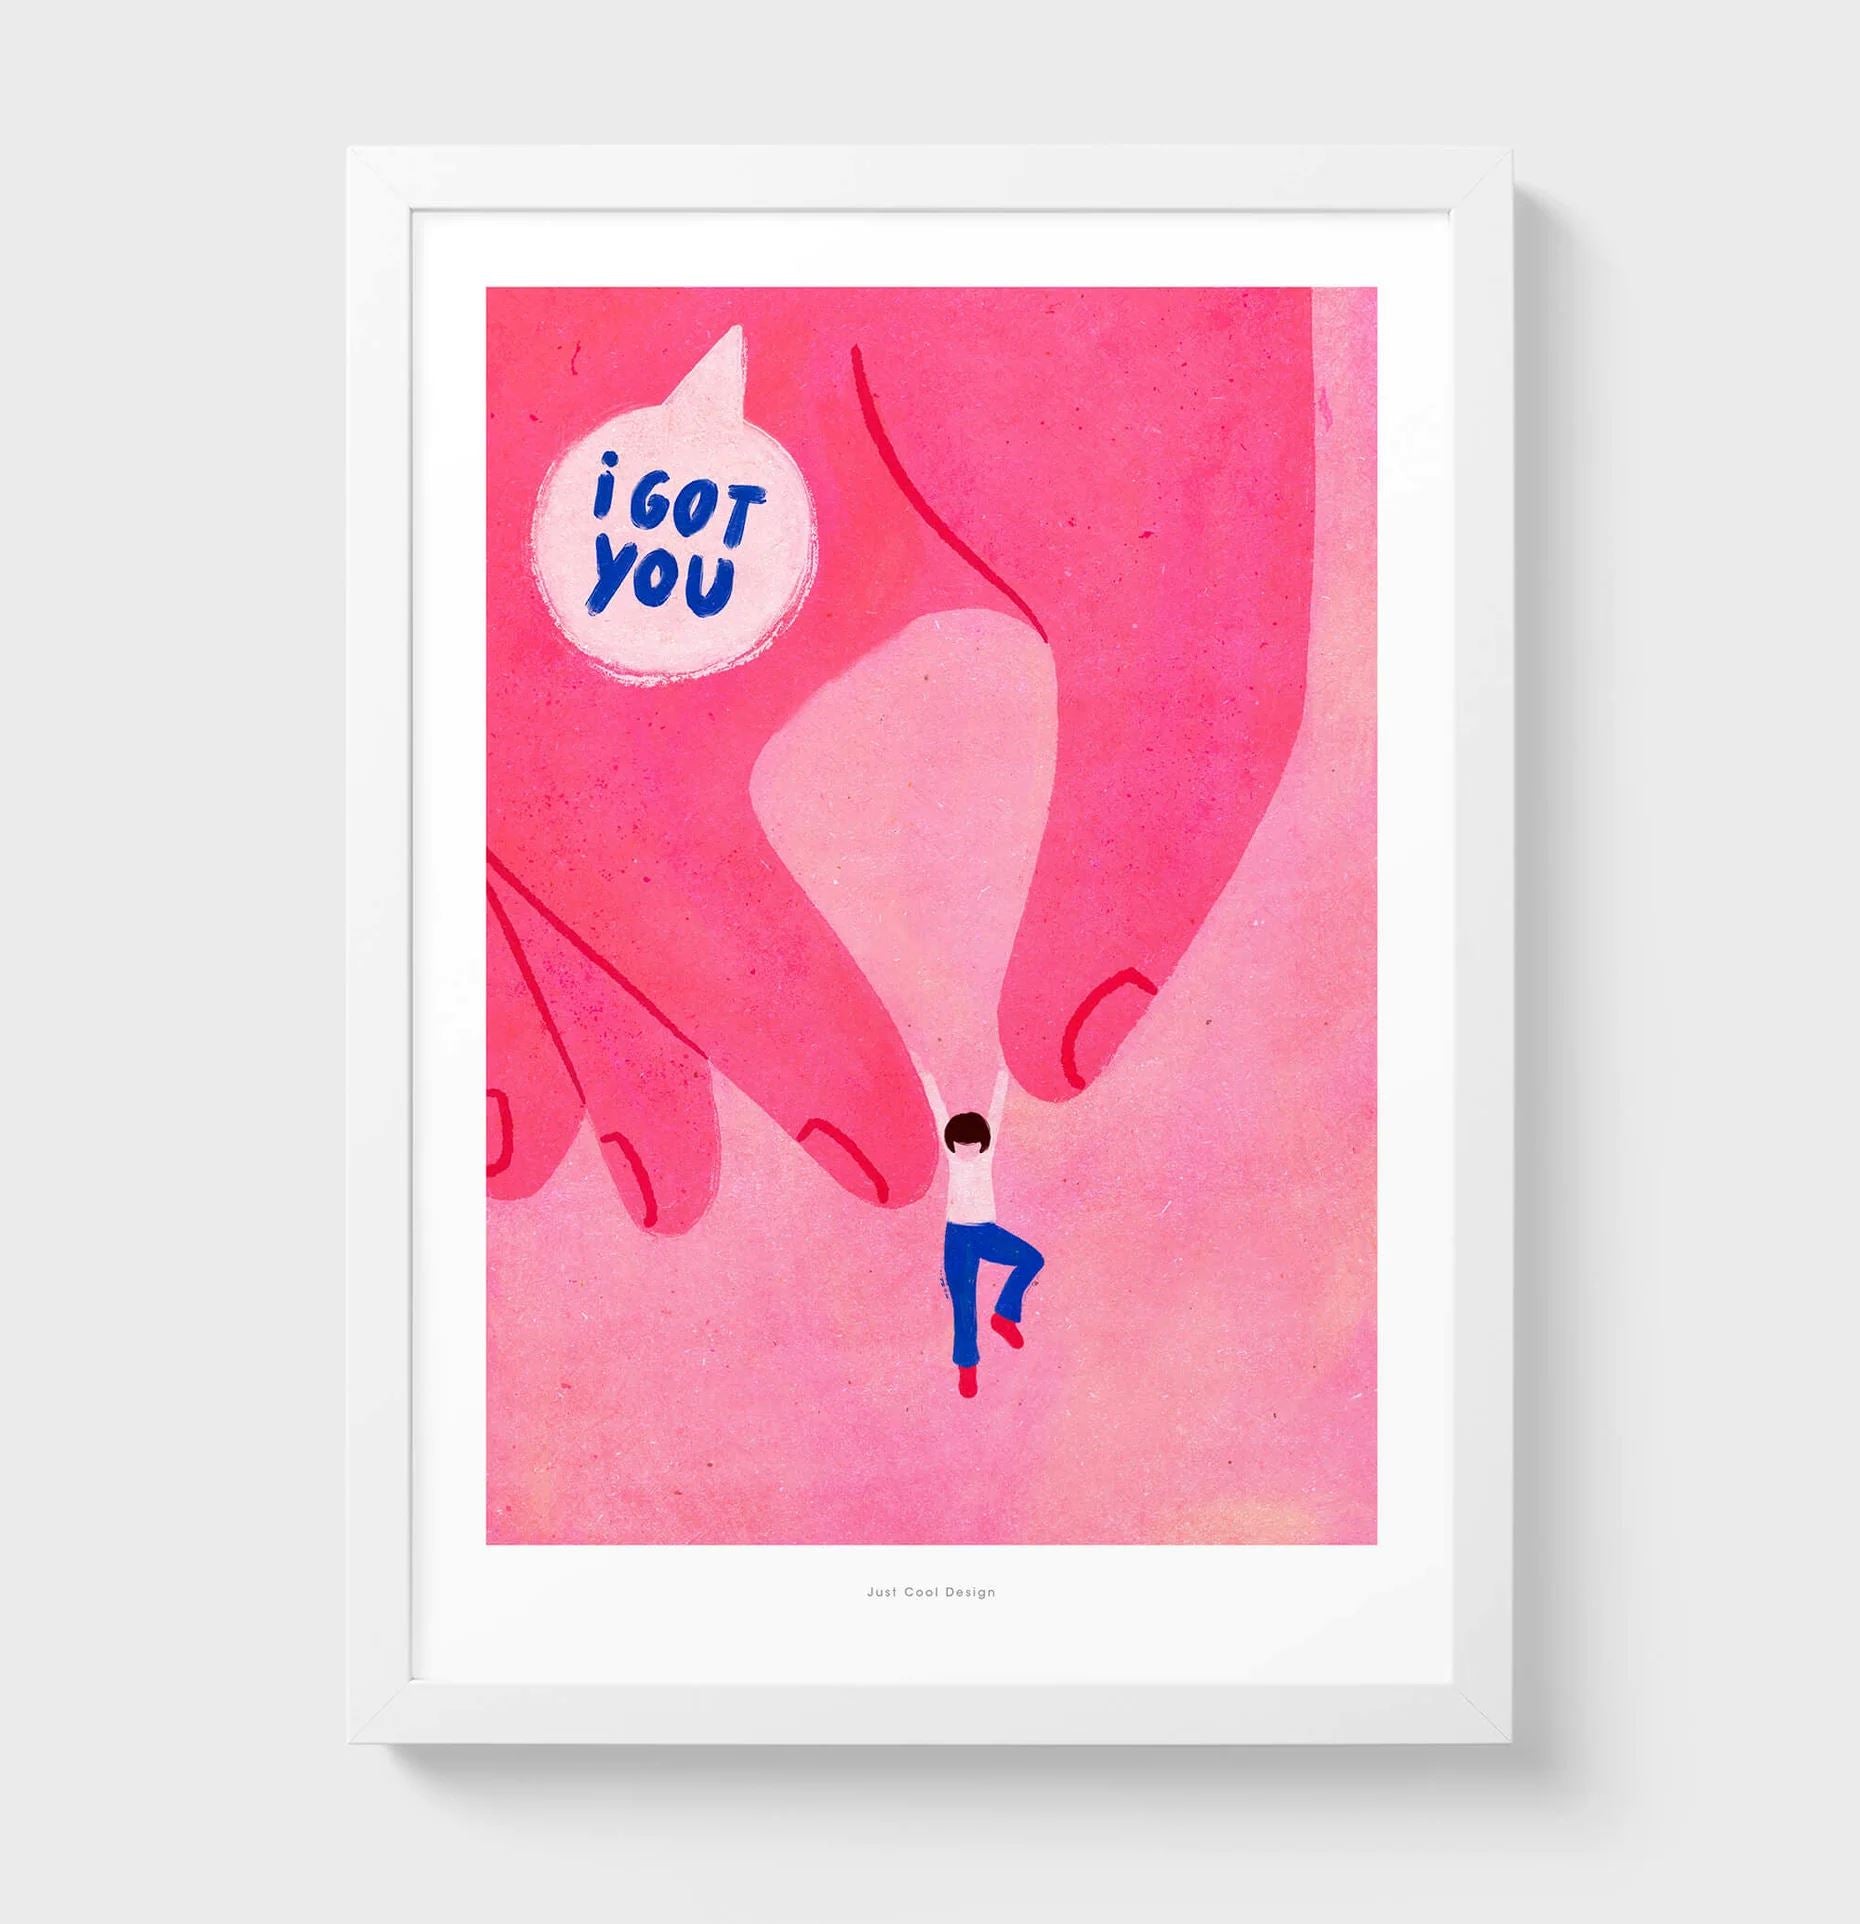 Poster "I got you" A4 Poster Just Cool Design 